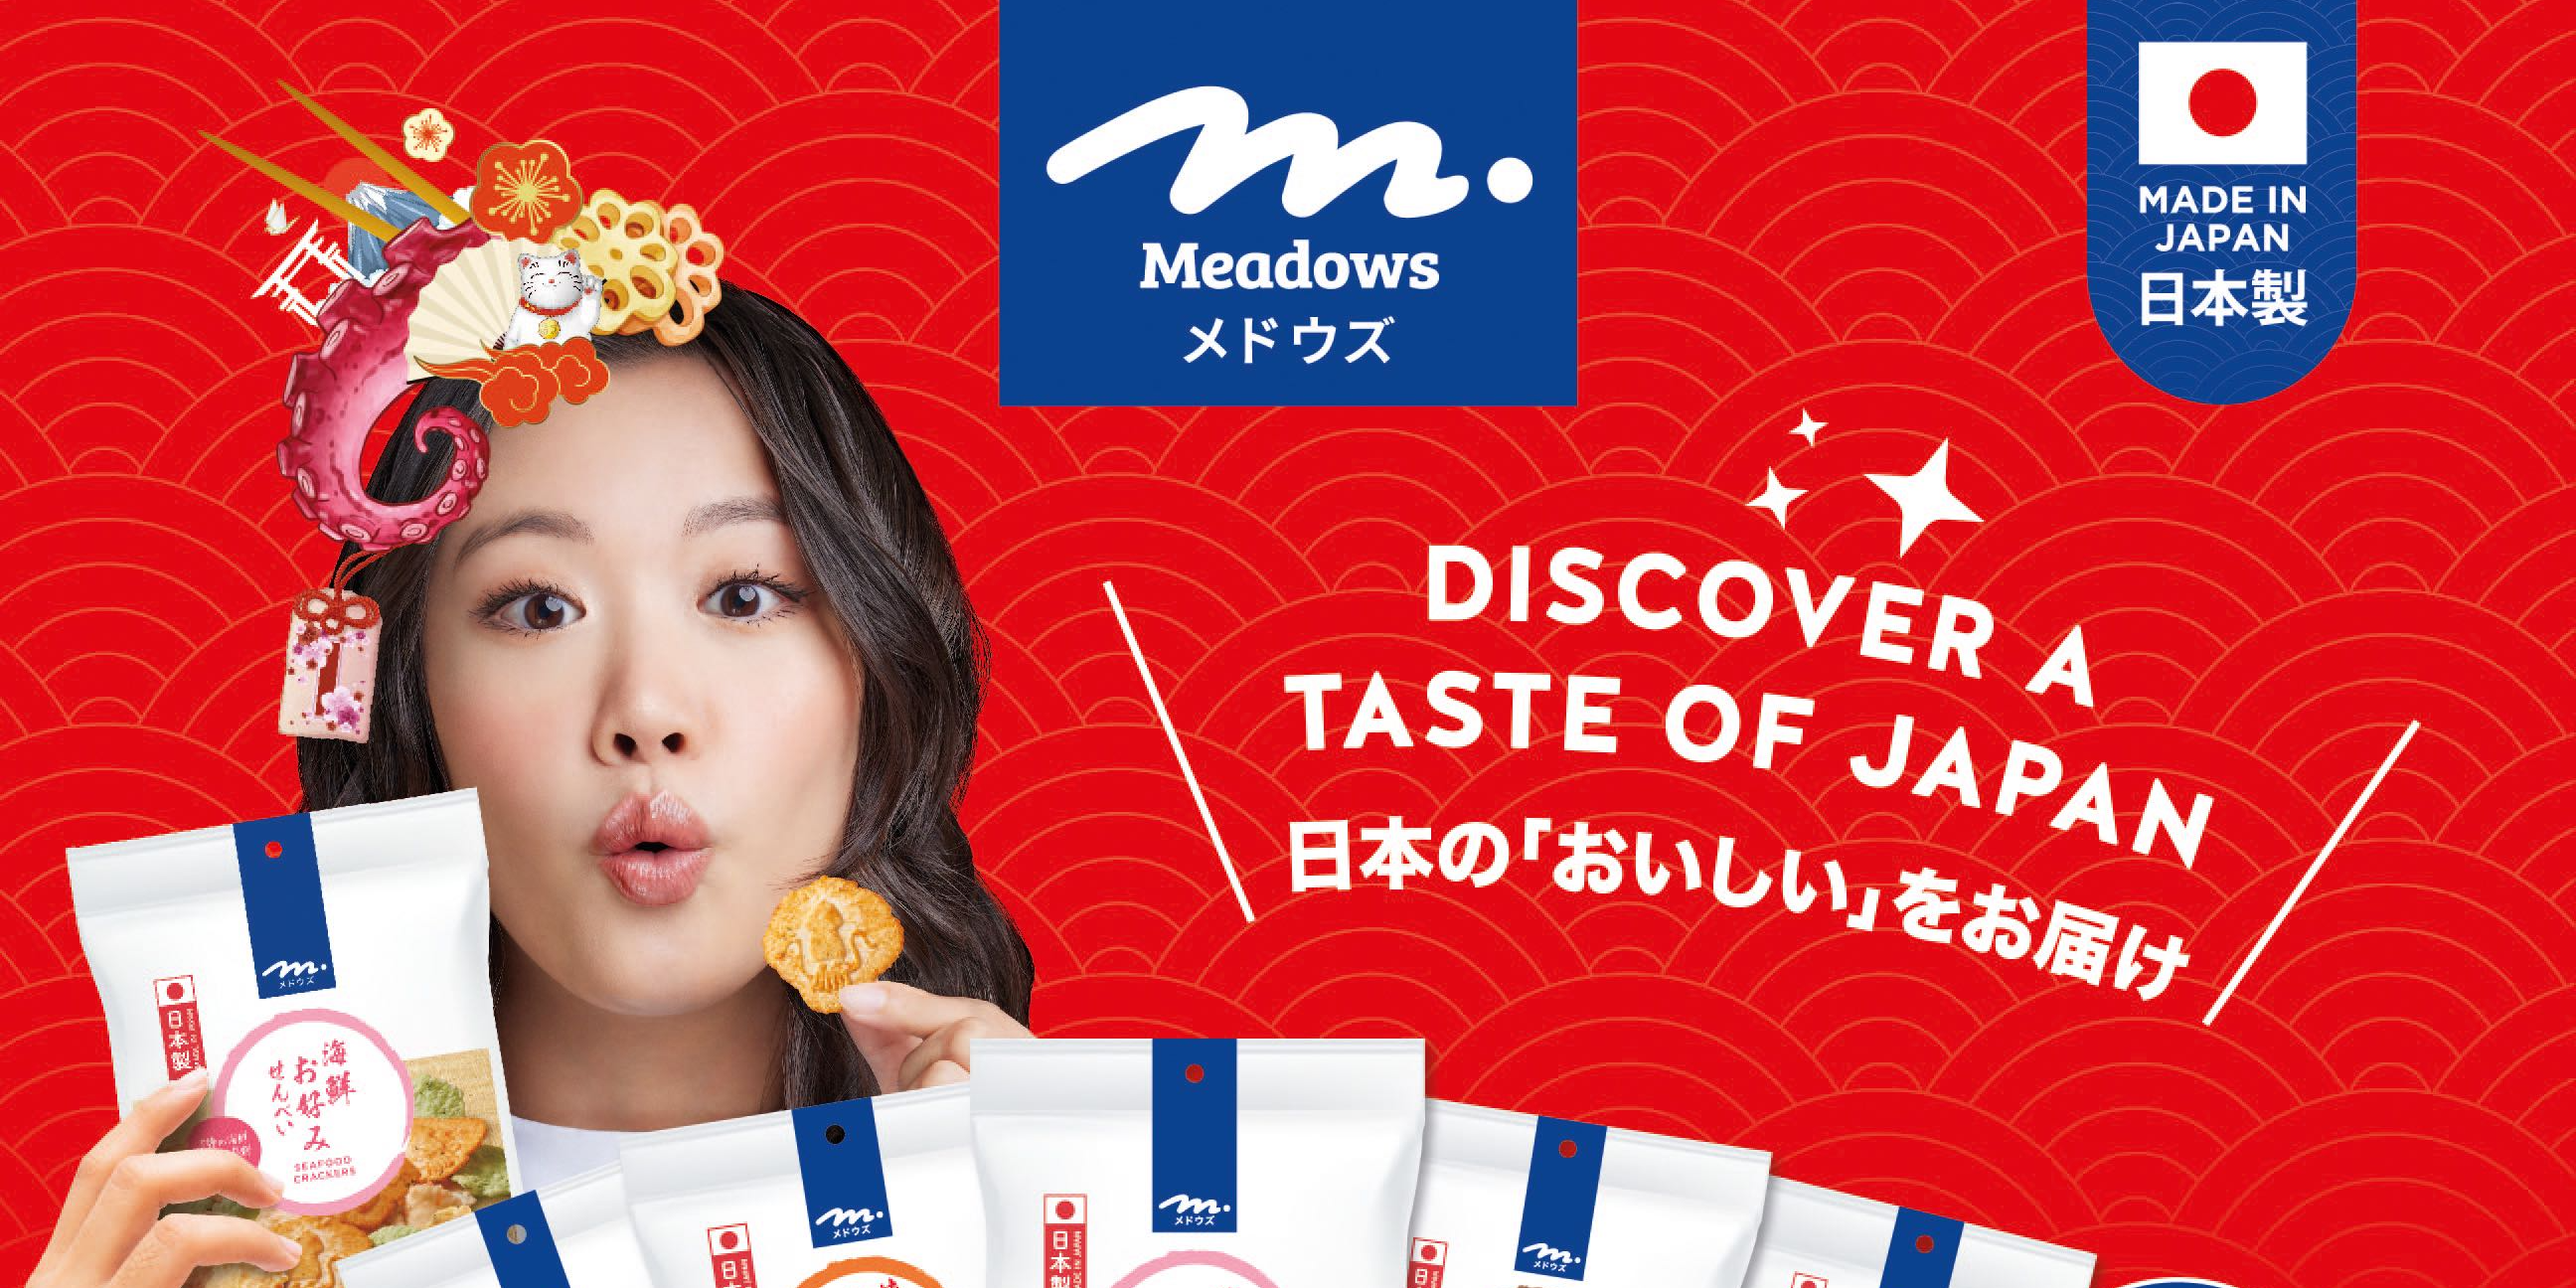 Discover the taste of Japan with Meadows Japan snacks!